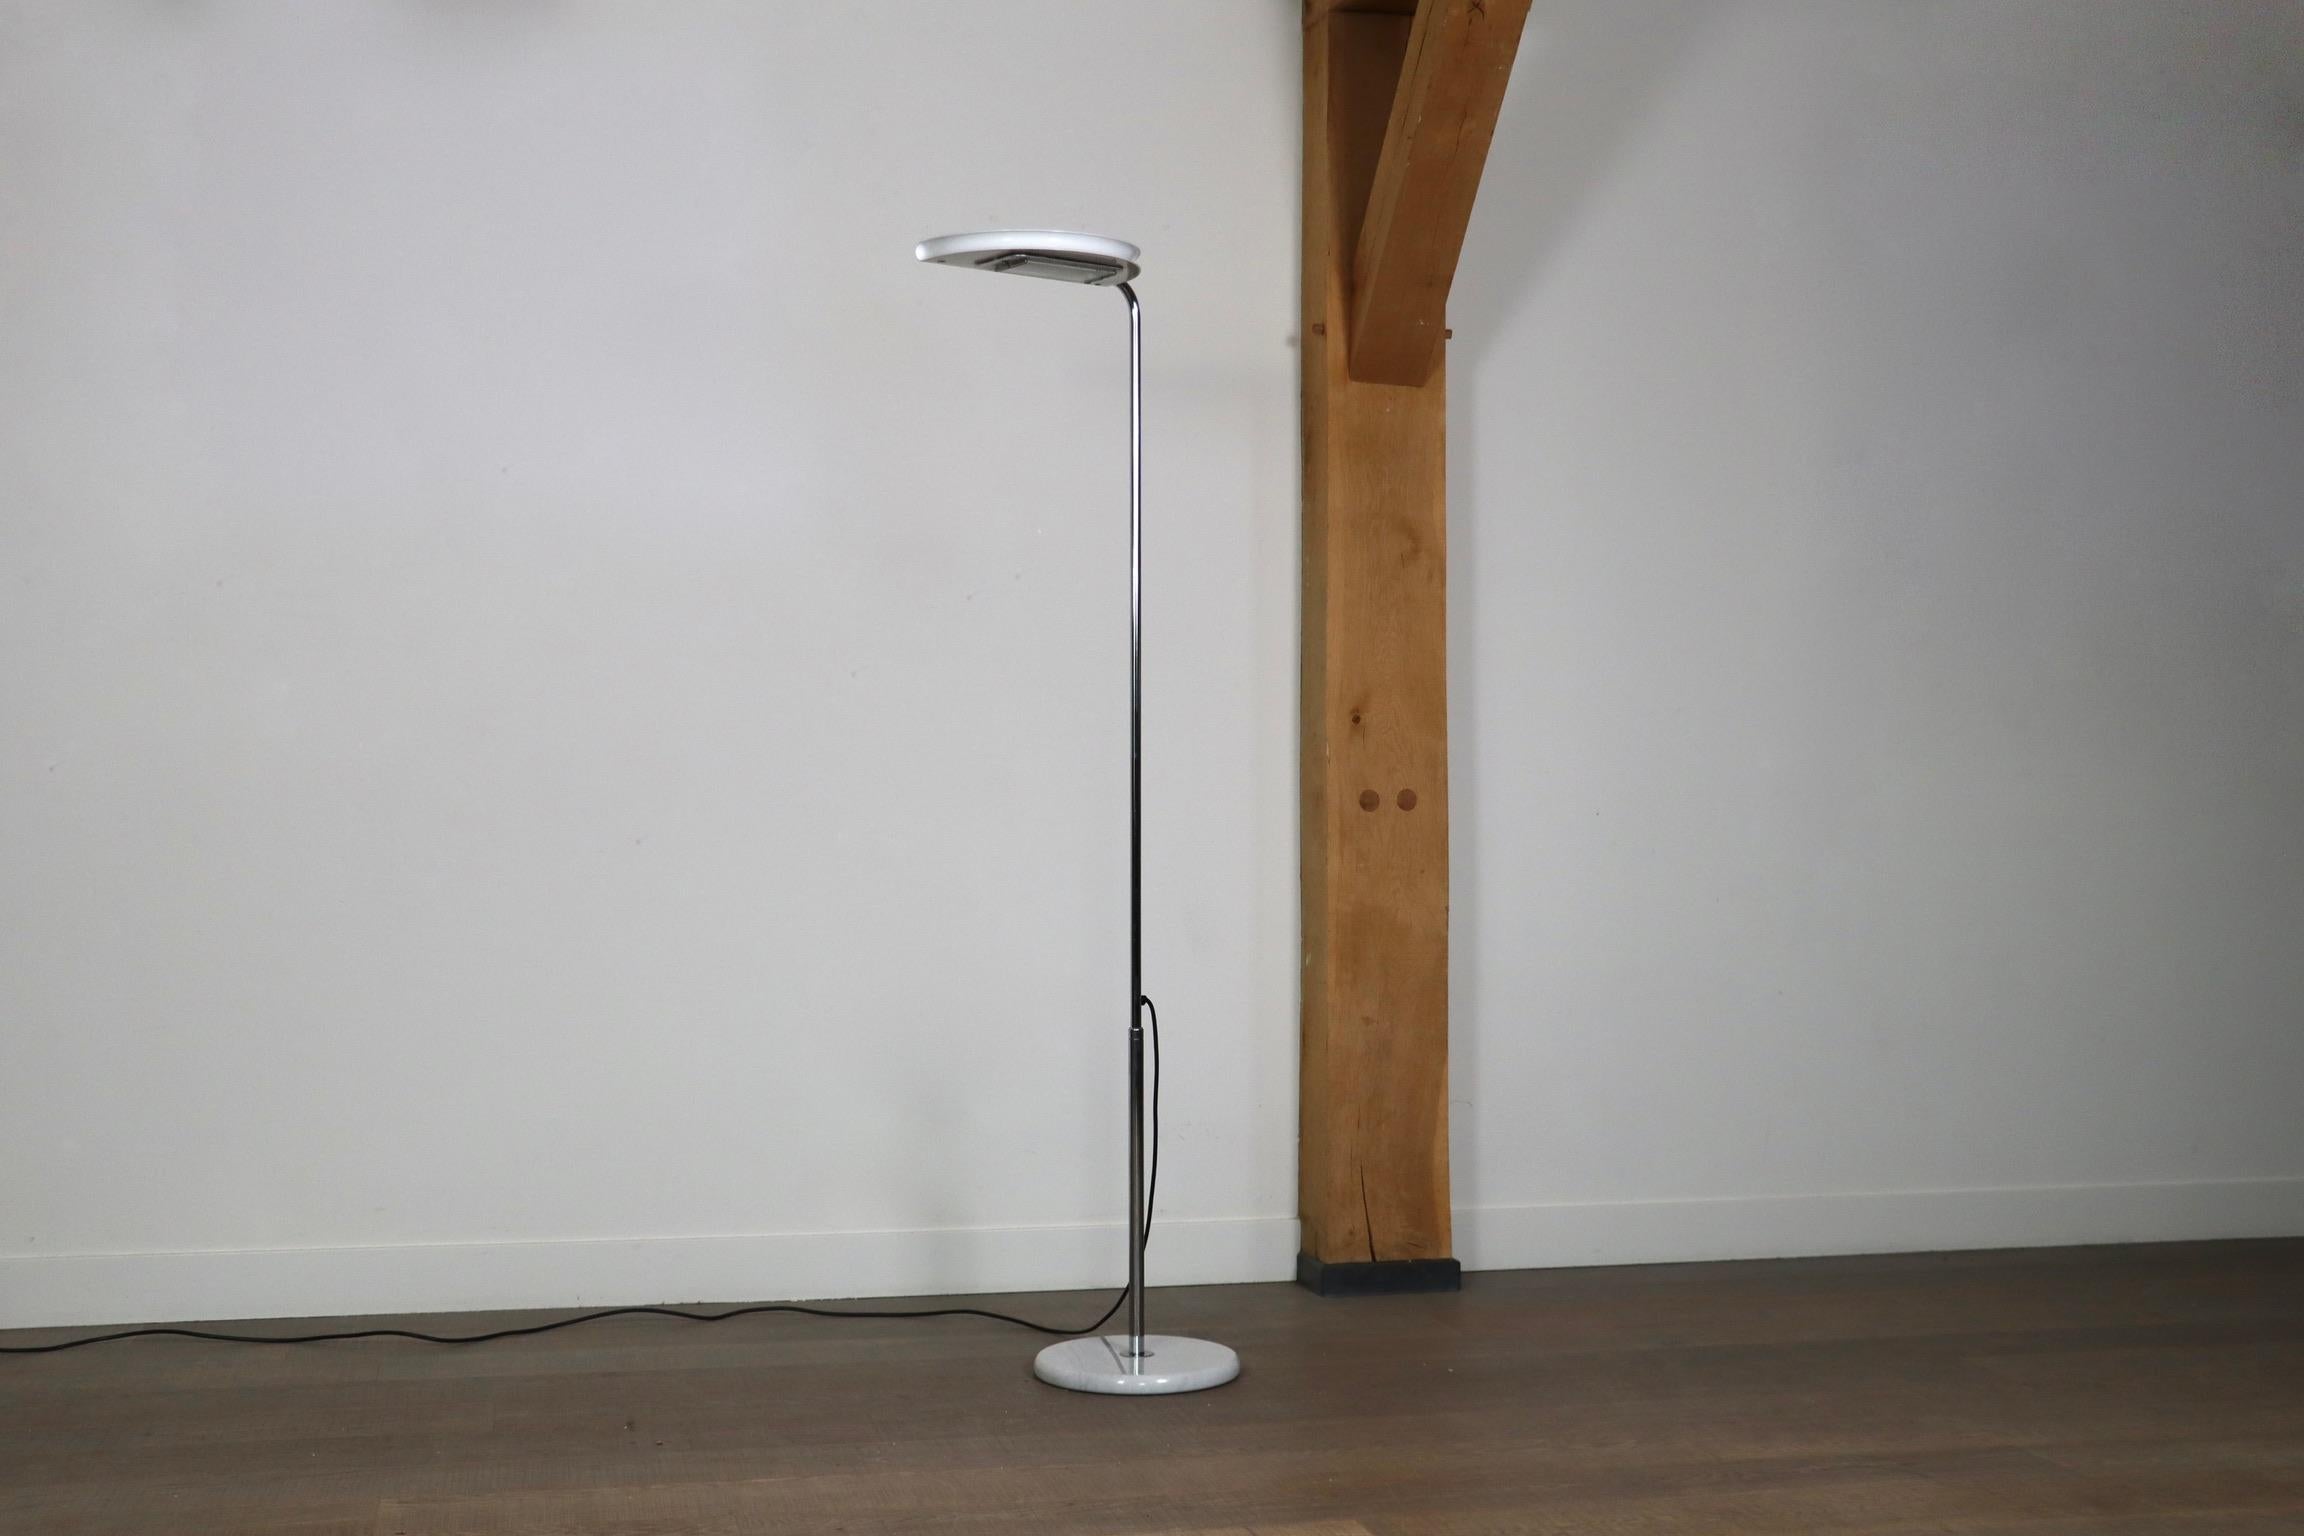 Beautiful “Mezzaluna” (half-moon) floor lamp, designed by Bruno Gecchelin for Skipper, crafted in Italy in 1975.
This sleek design features a tubular structure in chromed steel, anchored by a marble base, with an adjustable head lacquered in white